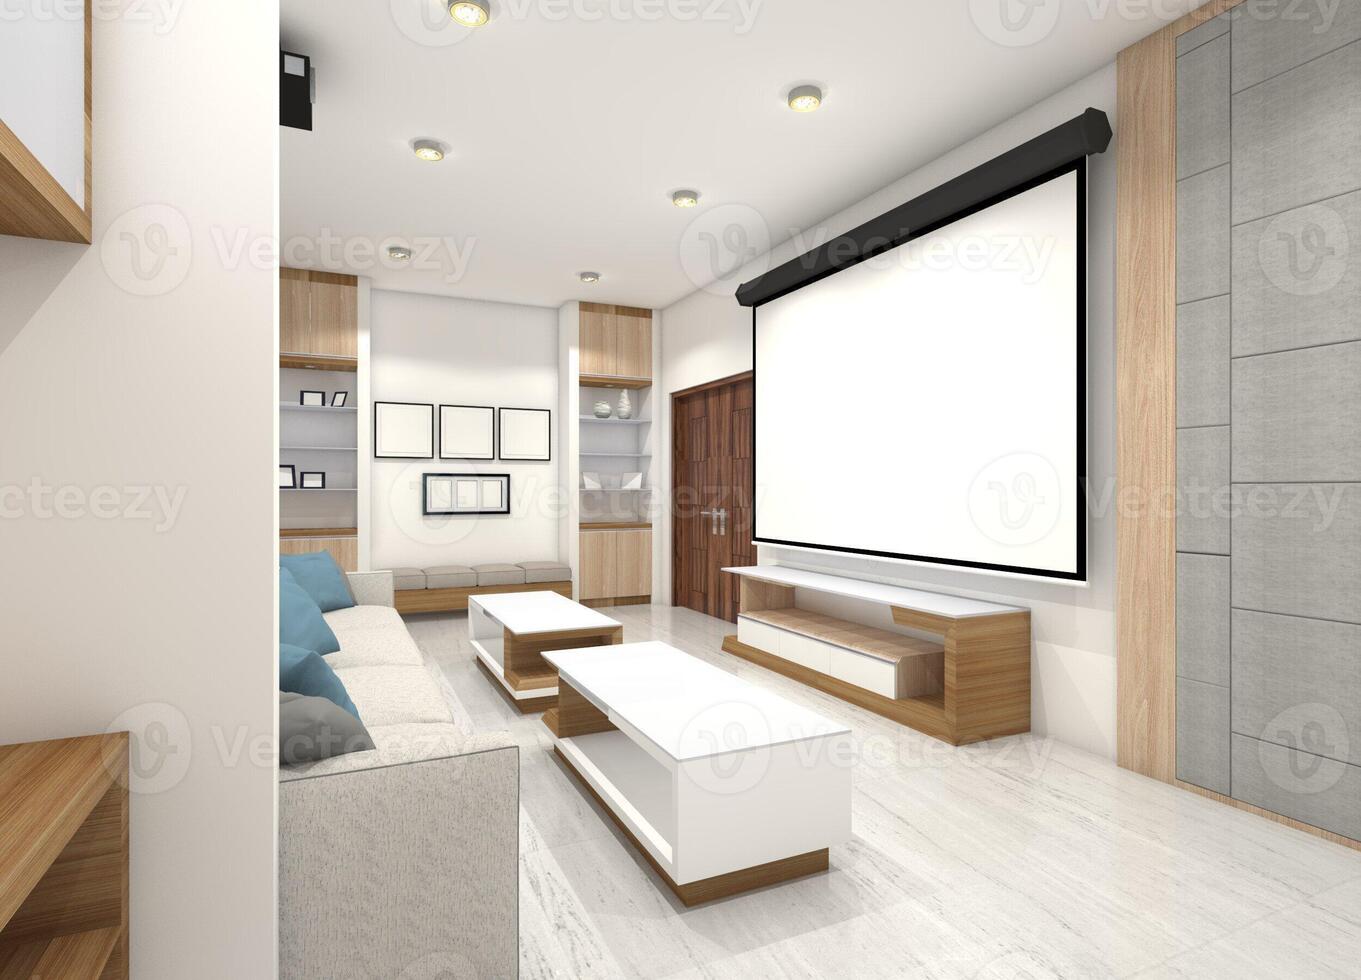 Luxury Private Cinema Design with Set Sofa Table and Large Screen Projector, 3D Illustration photo